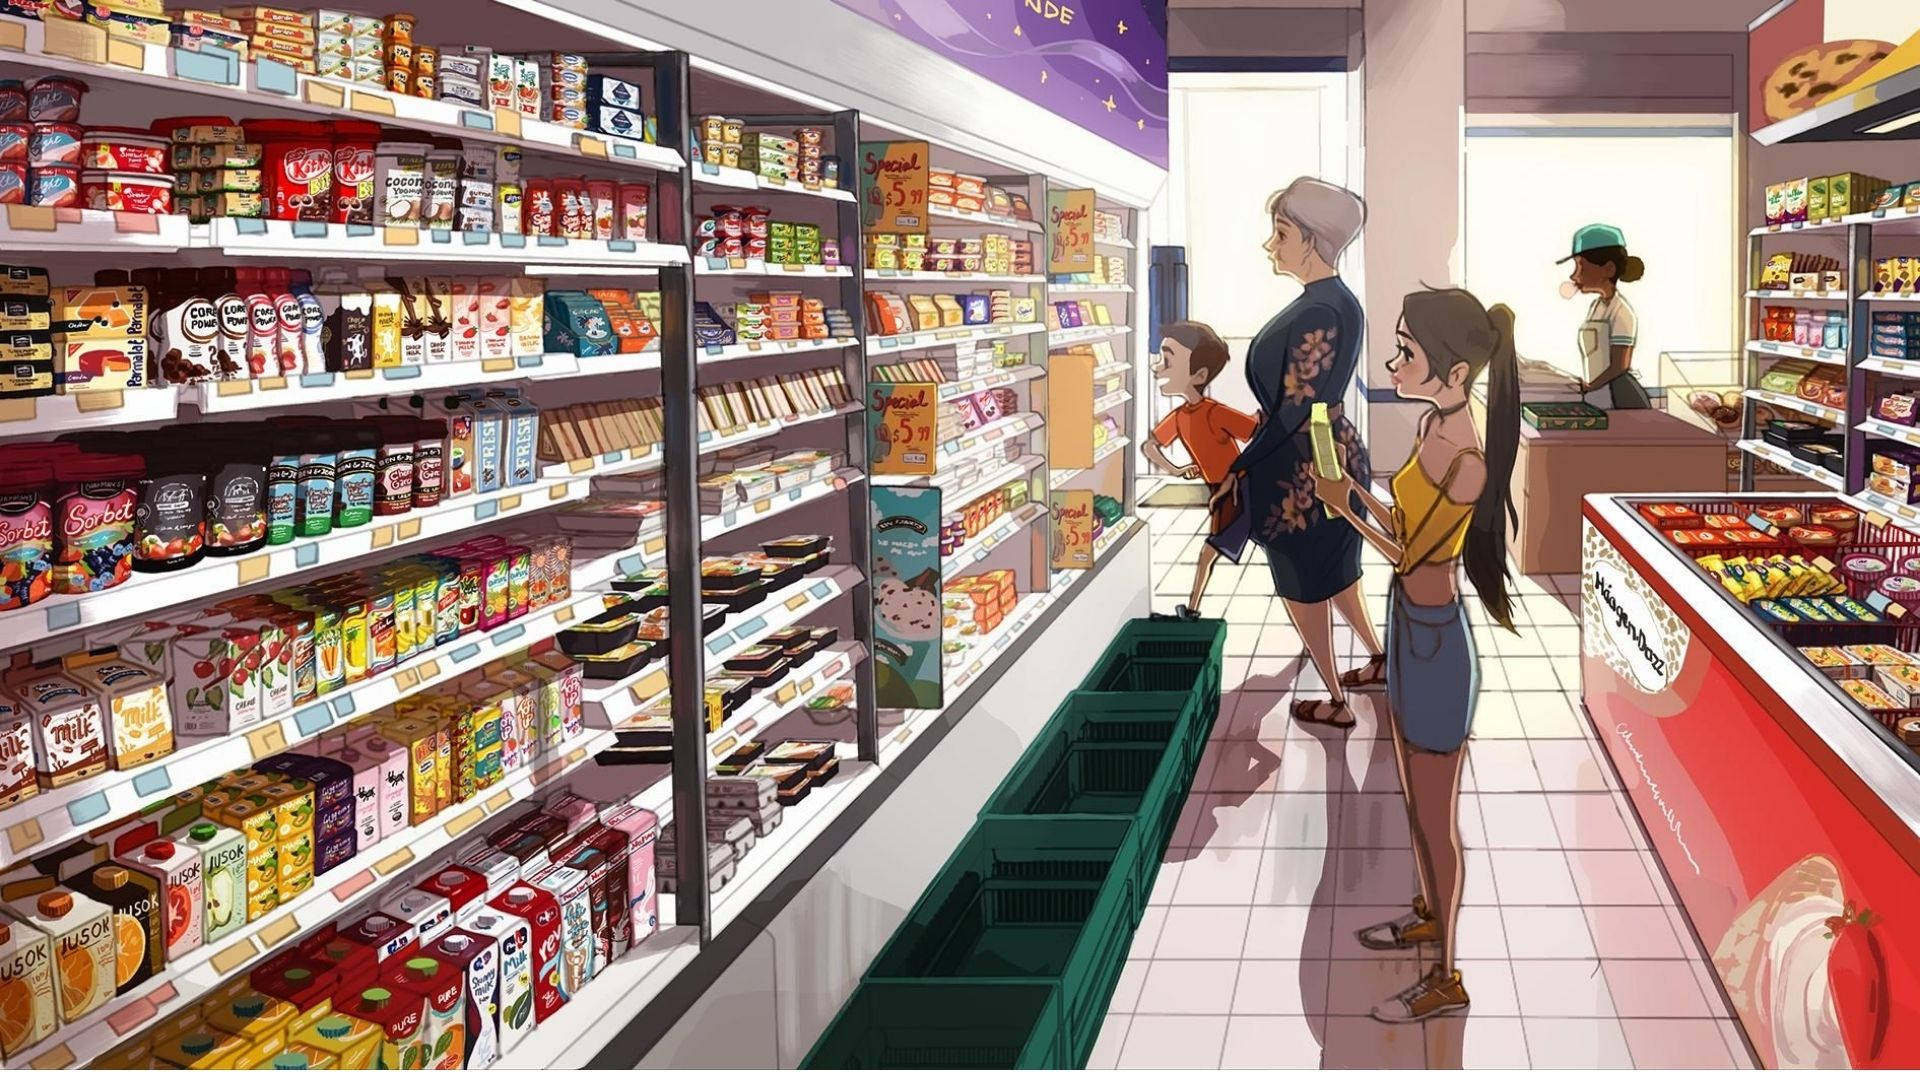 Download Anime Convenience Store Top View Wallpaper | Wallpapers.com